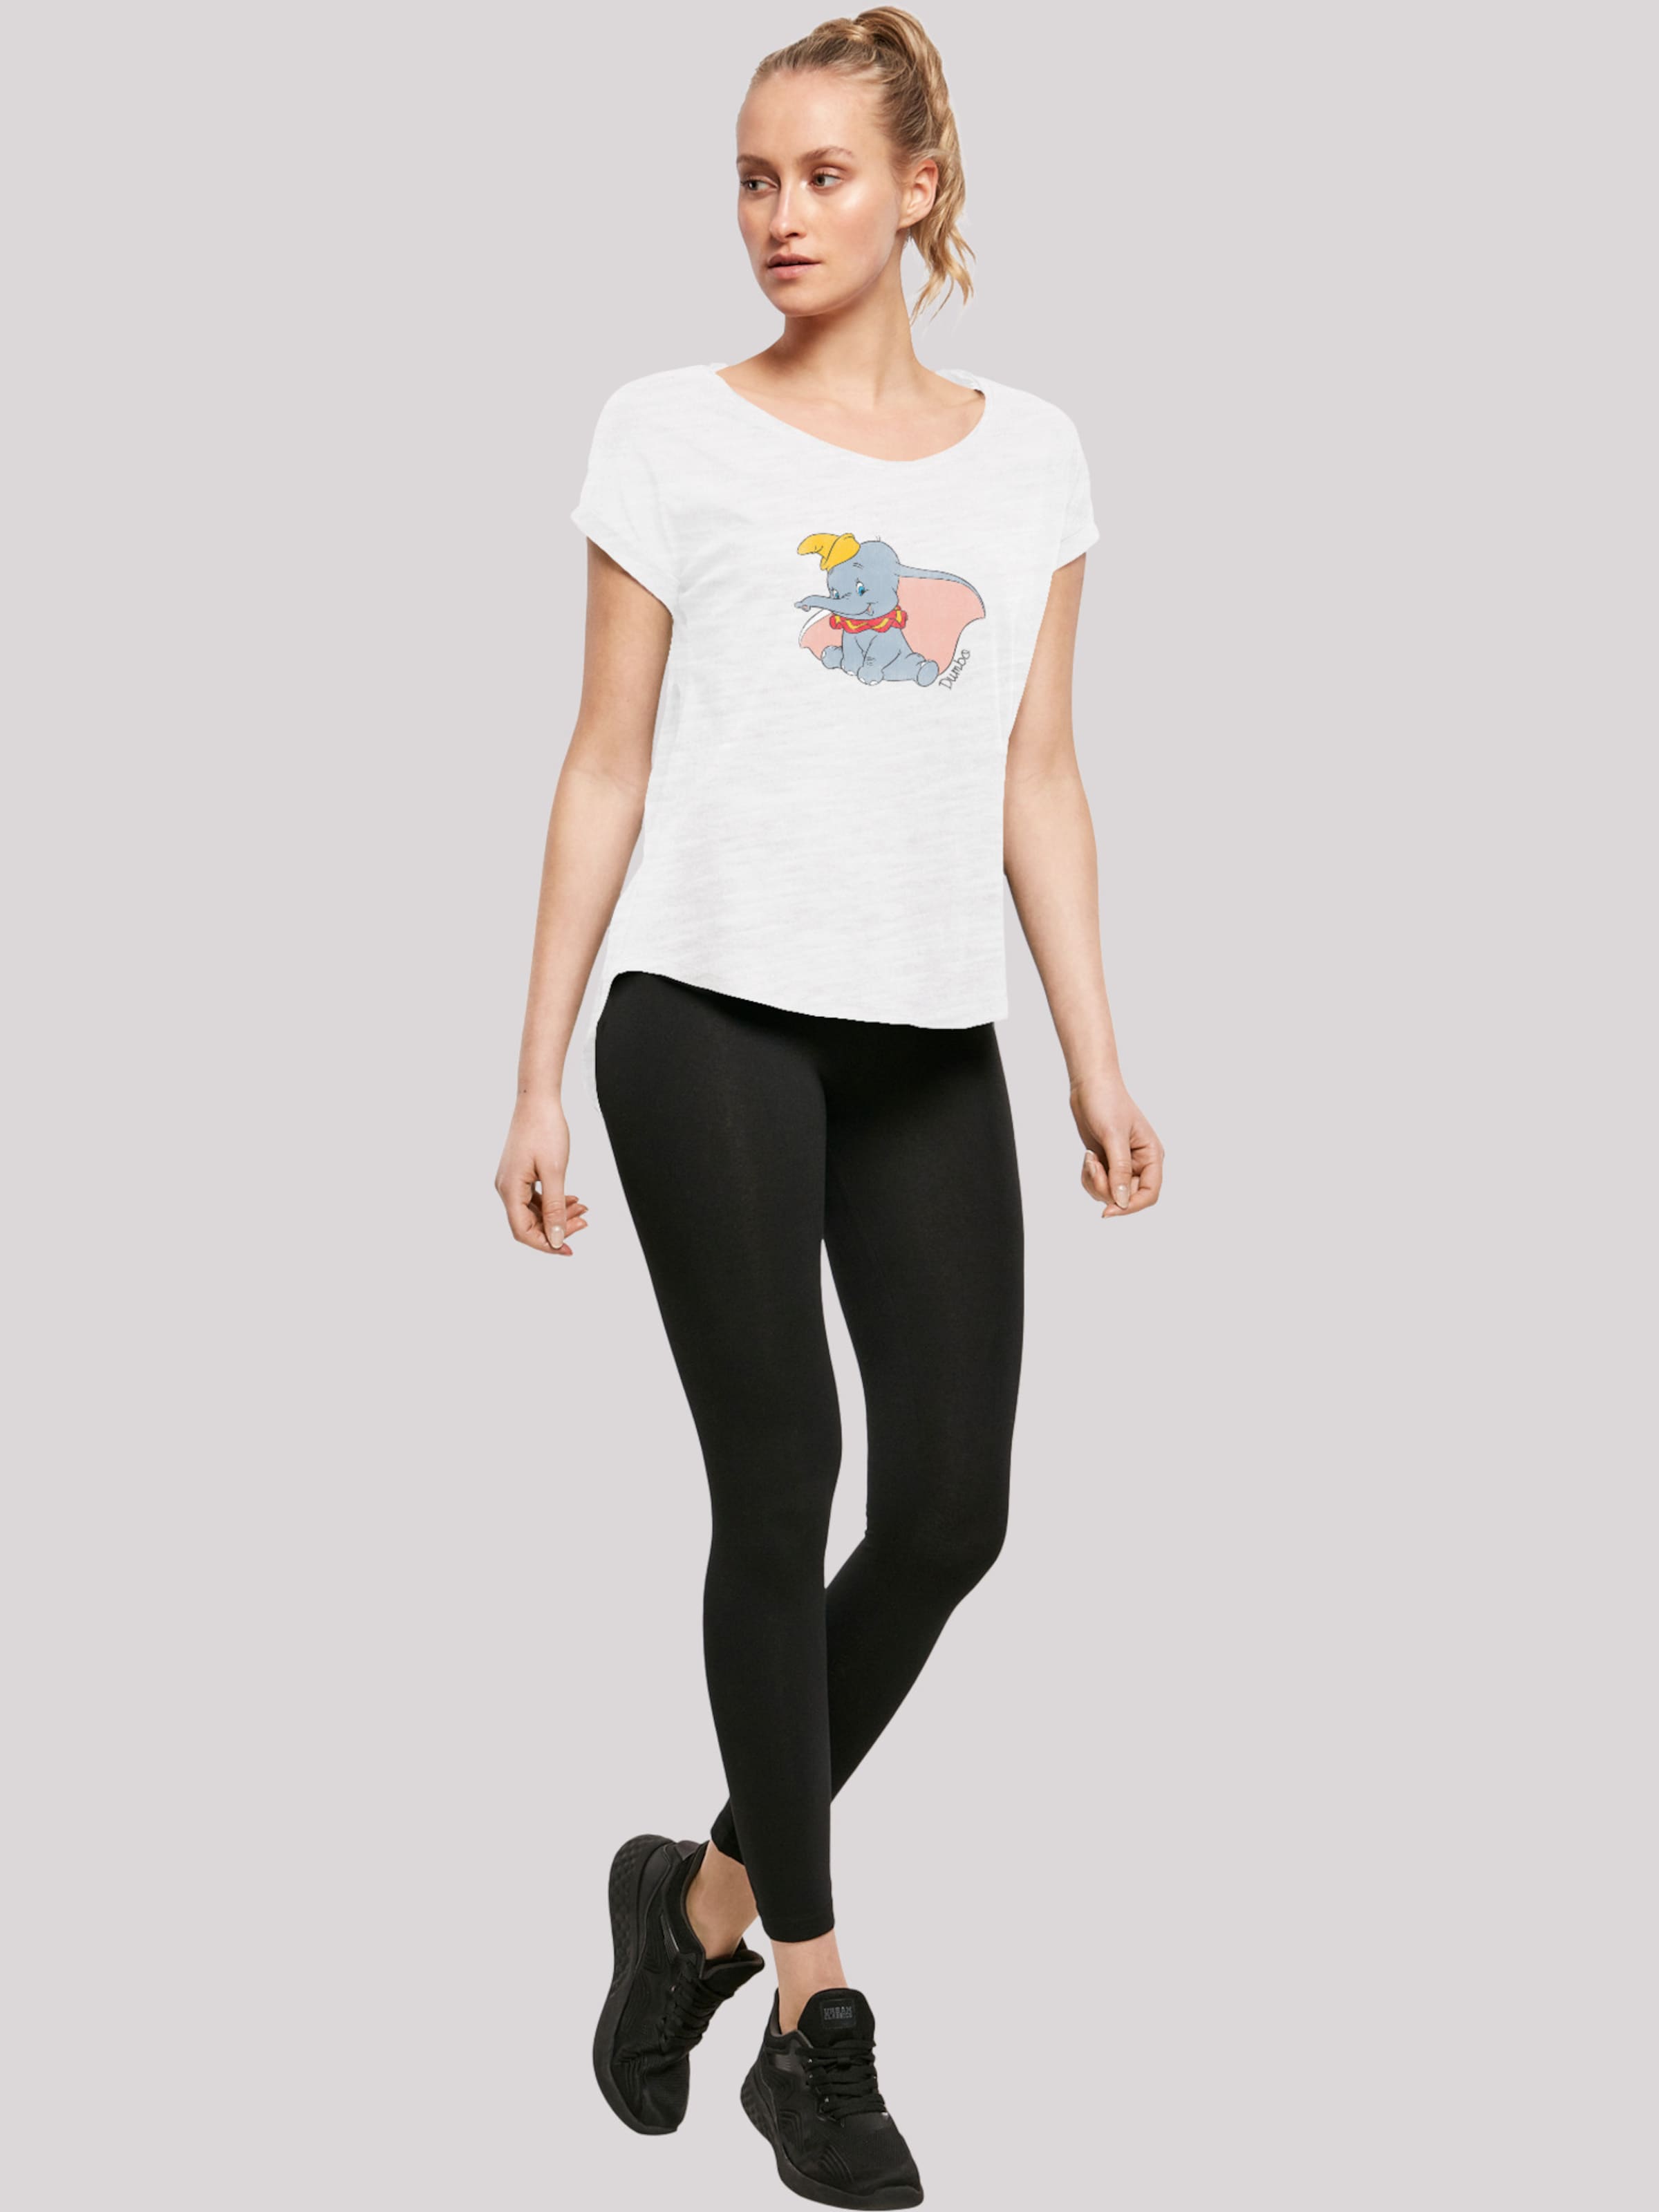 F4NT4STIC Shirt 'Disney Dumbo' in White | ABOUT YOU